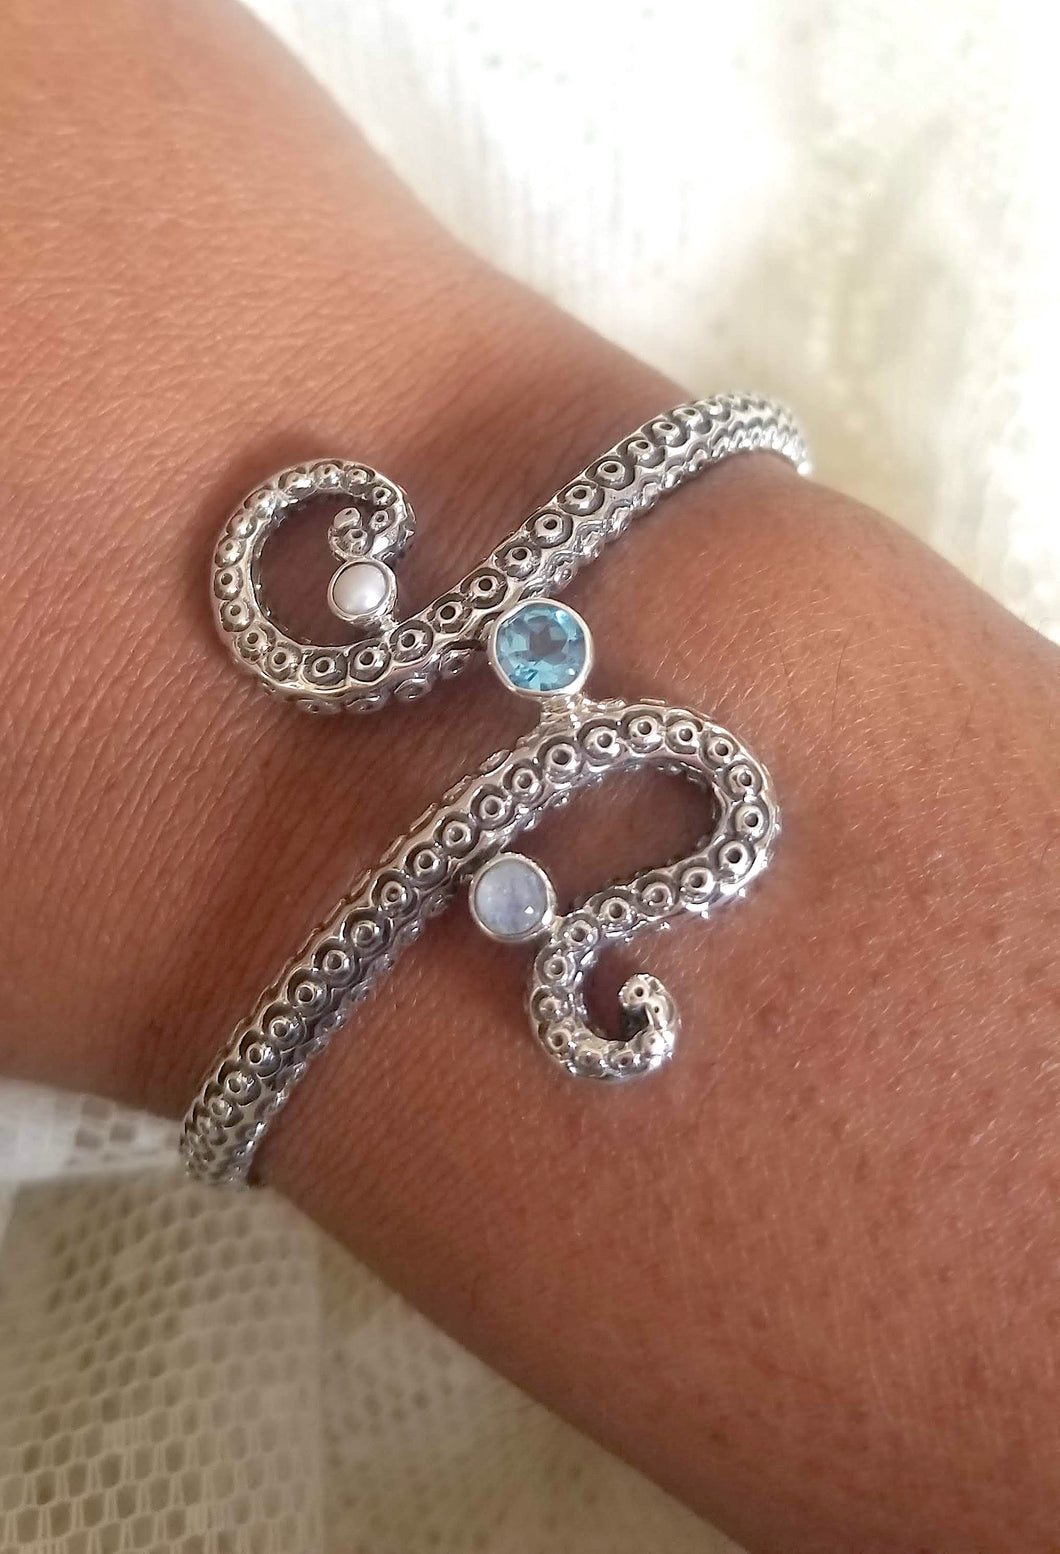 Octopus Tentacle bangle with Topaz